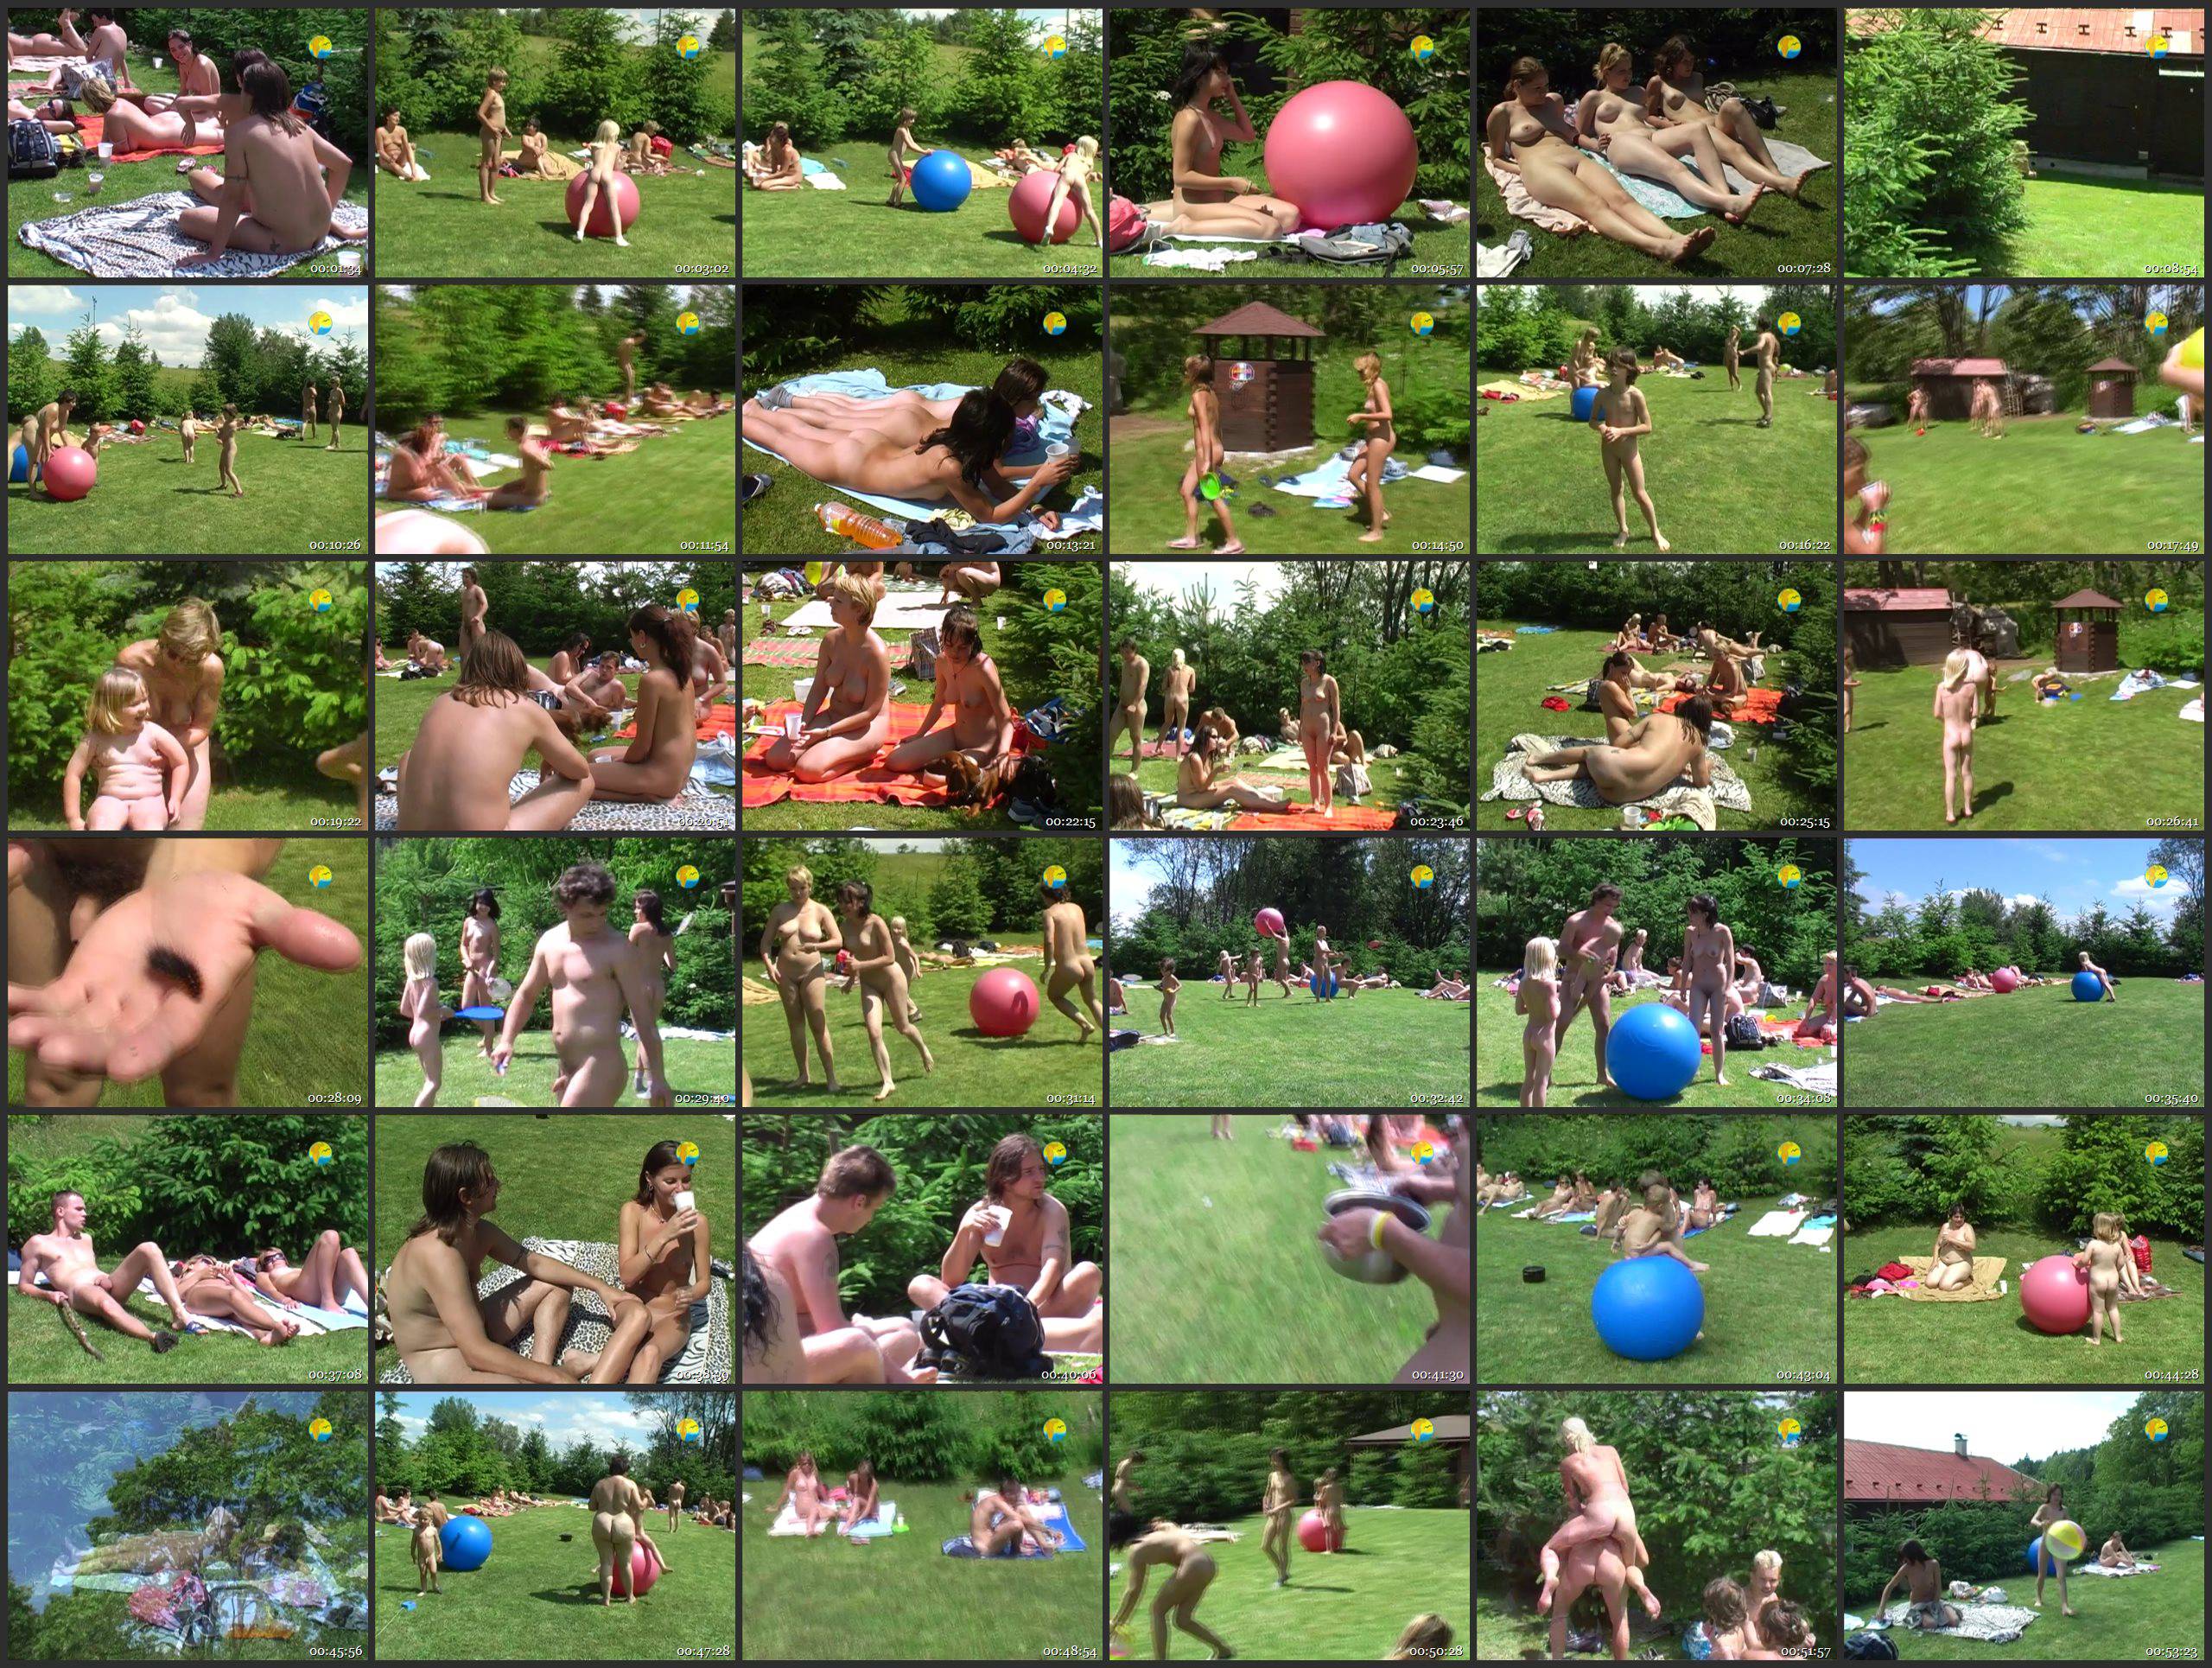 Naturist Freedom Videos You can never get enough Sunbathing - Thumbnails